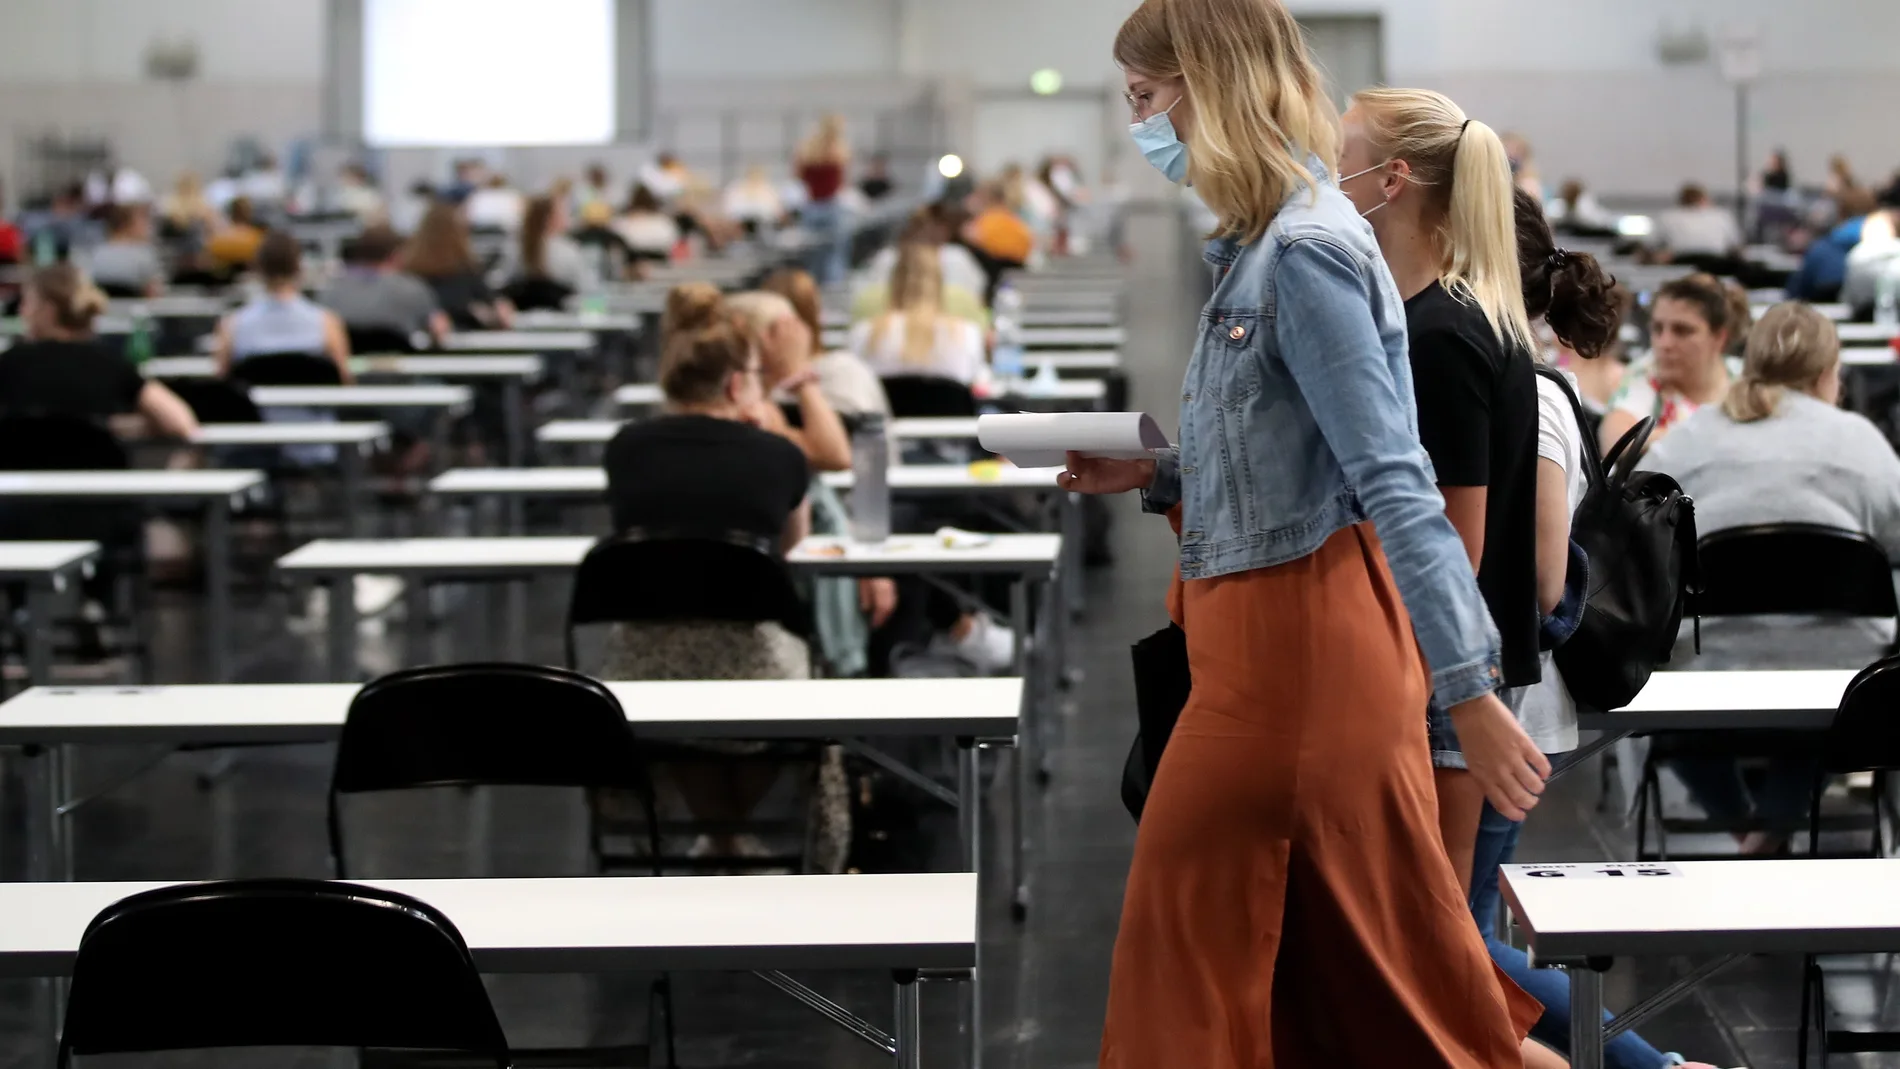 Students of the Technical University Dortmund write their exams in the exhibition hall